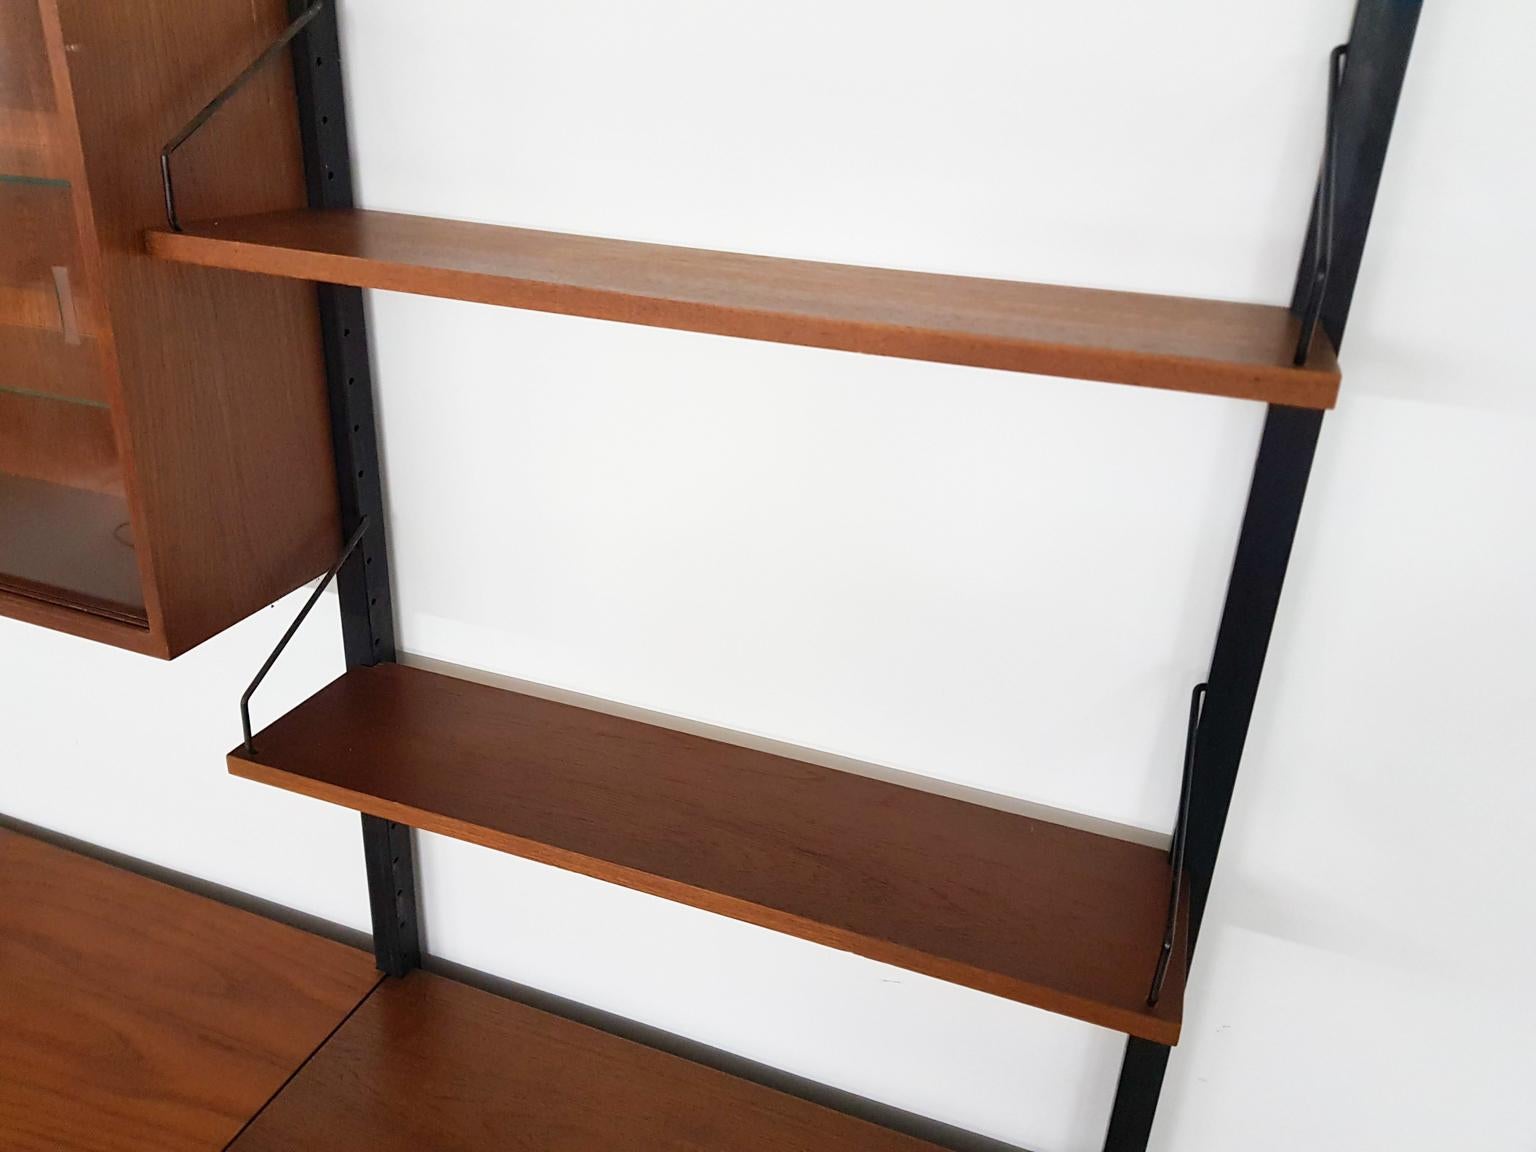 20th Century Poul Cadovius for Royal System Wall System Book Shelves in Teak, Denmark, 1950s For Sale